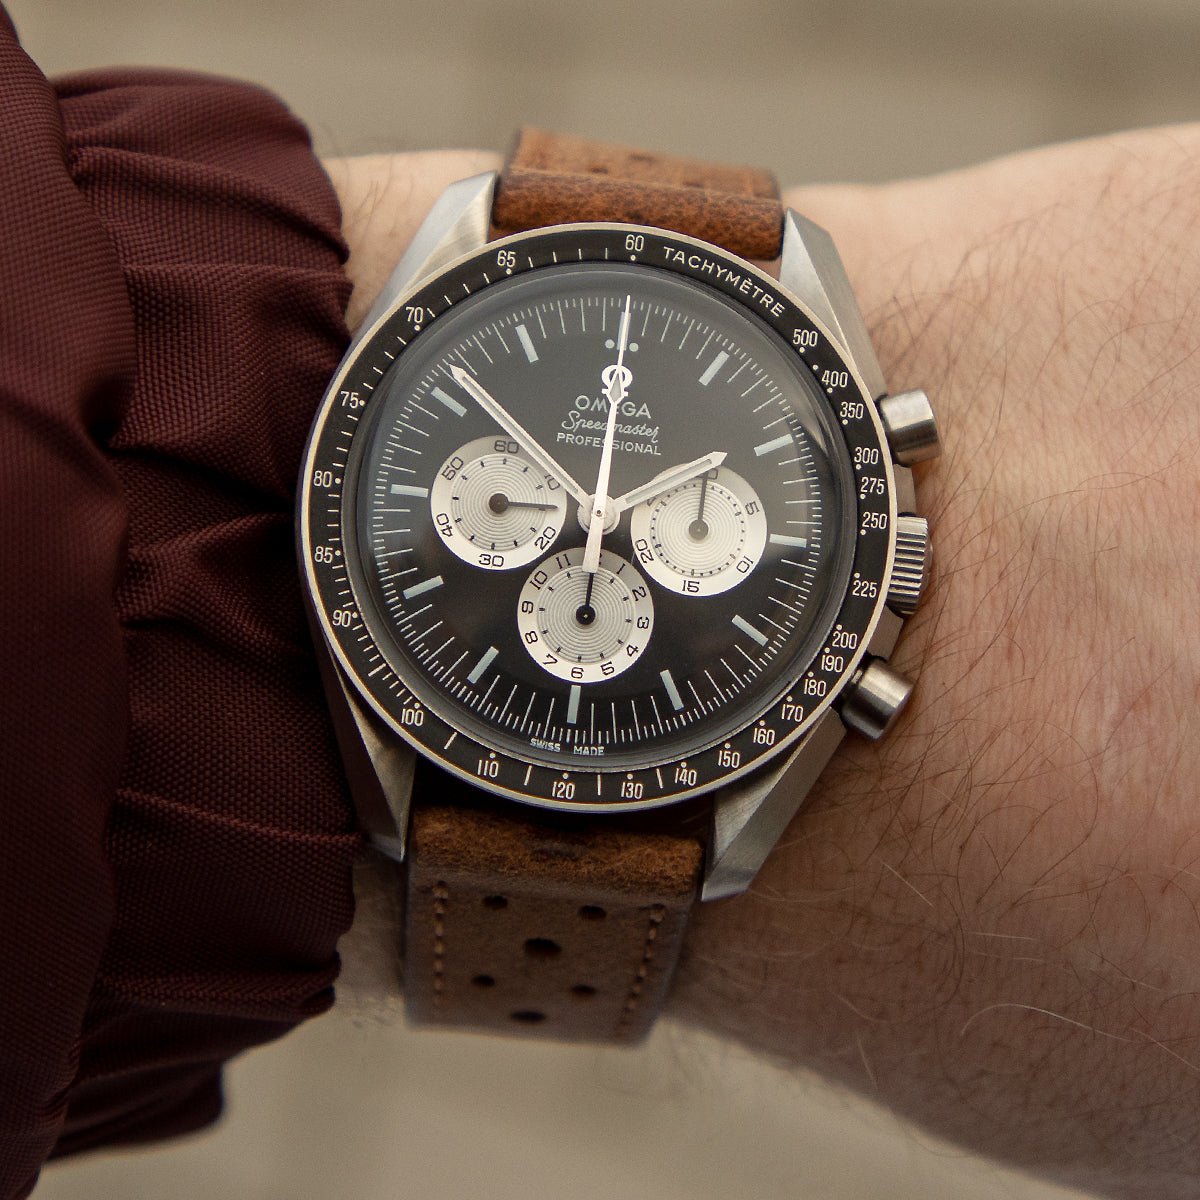 JPM Racing strap in peanut on the wrist with Omega Speedmaster